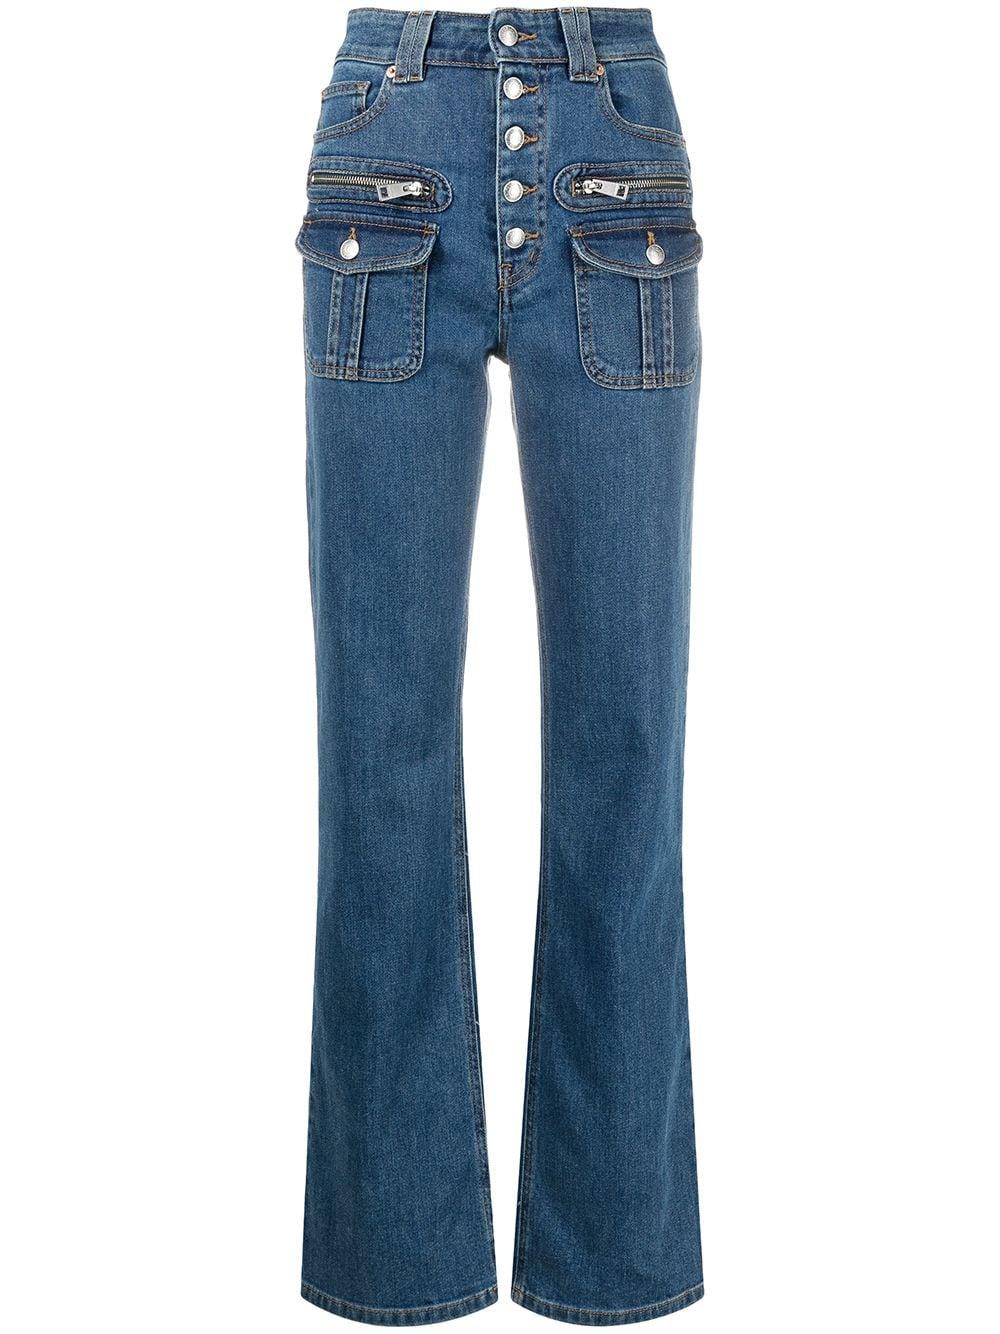 Zadig & Voltaire Eyes High-rise Straight Jeans in Blue | Lyst